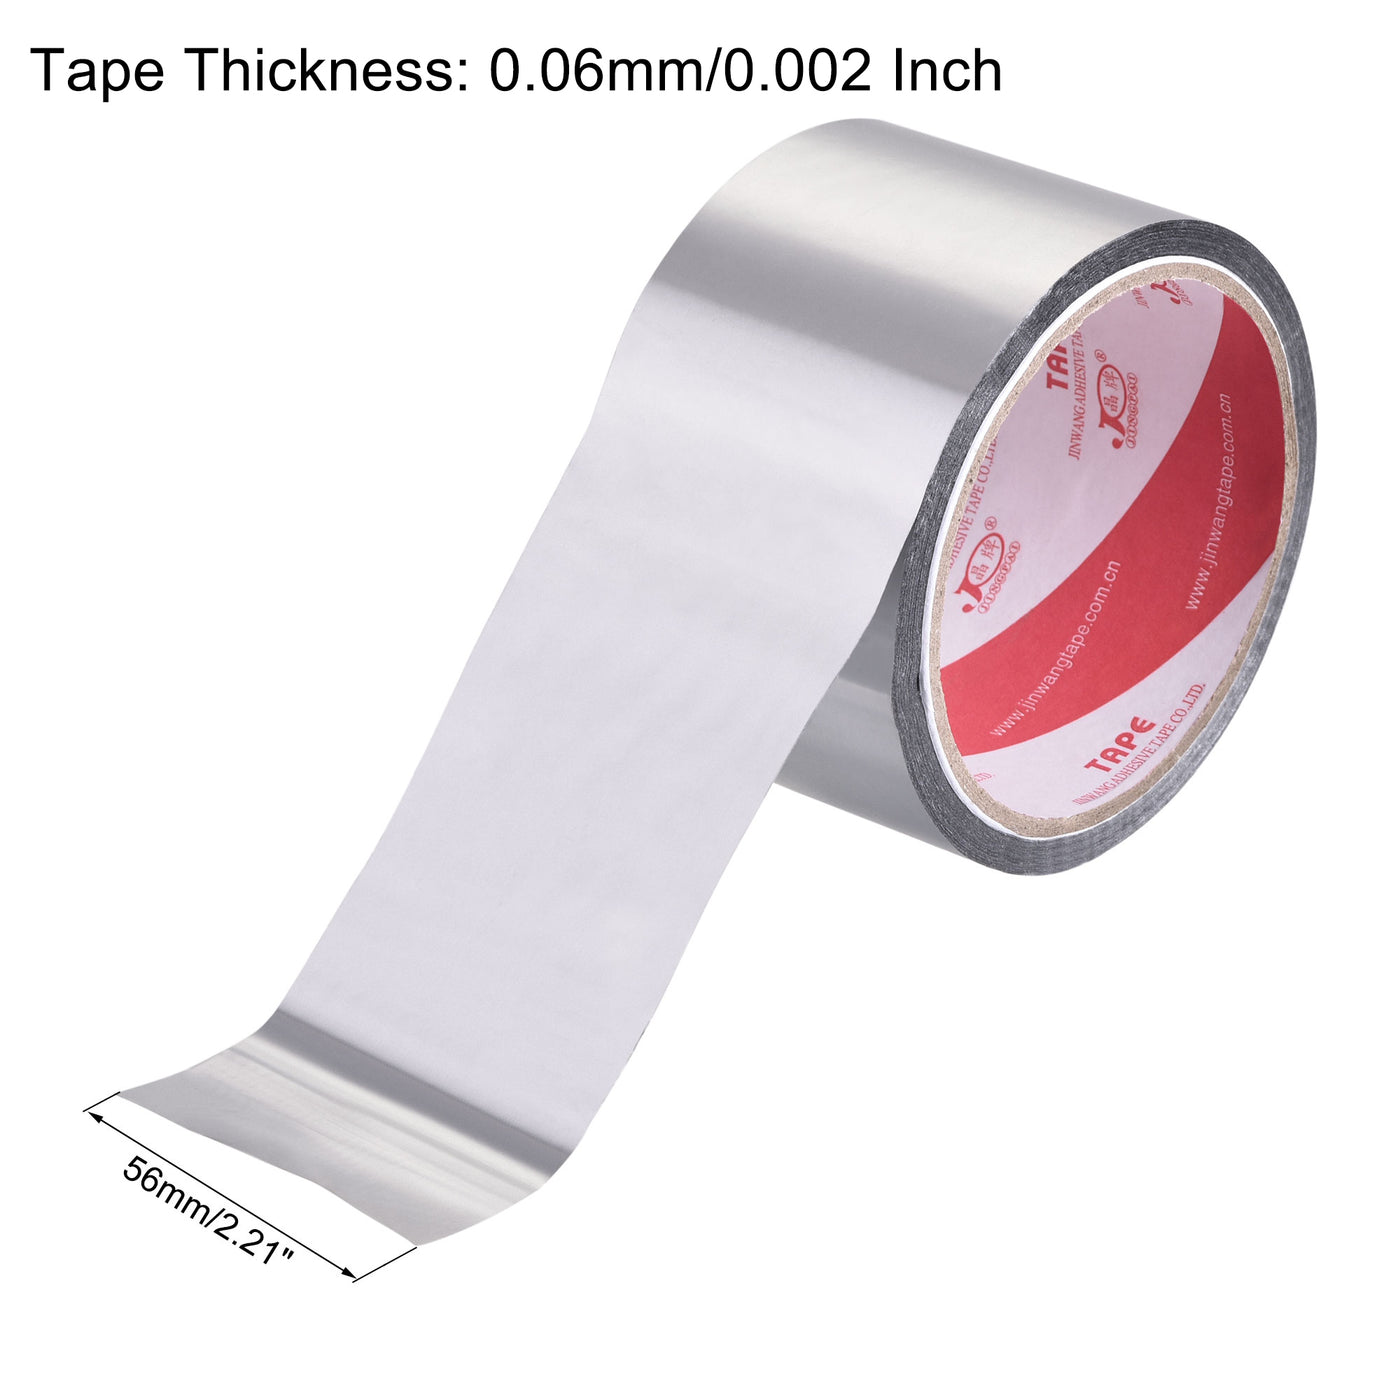 uxcell Uxcell Aluminum Foil Tape, 56mmx32m Self-adhesive Waterproof High Temperature Sealing Tapes for HVAC Duct Pipe Insulation, Pack of 3